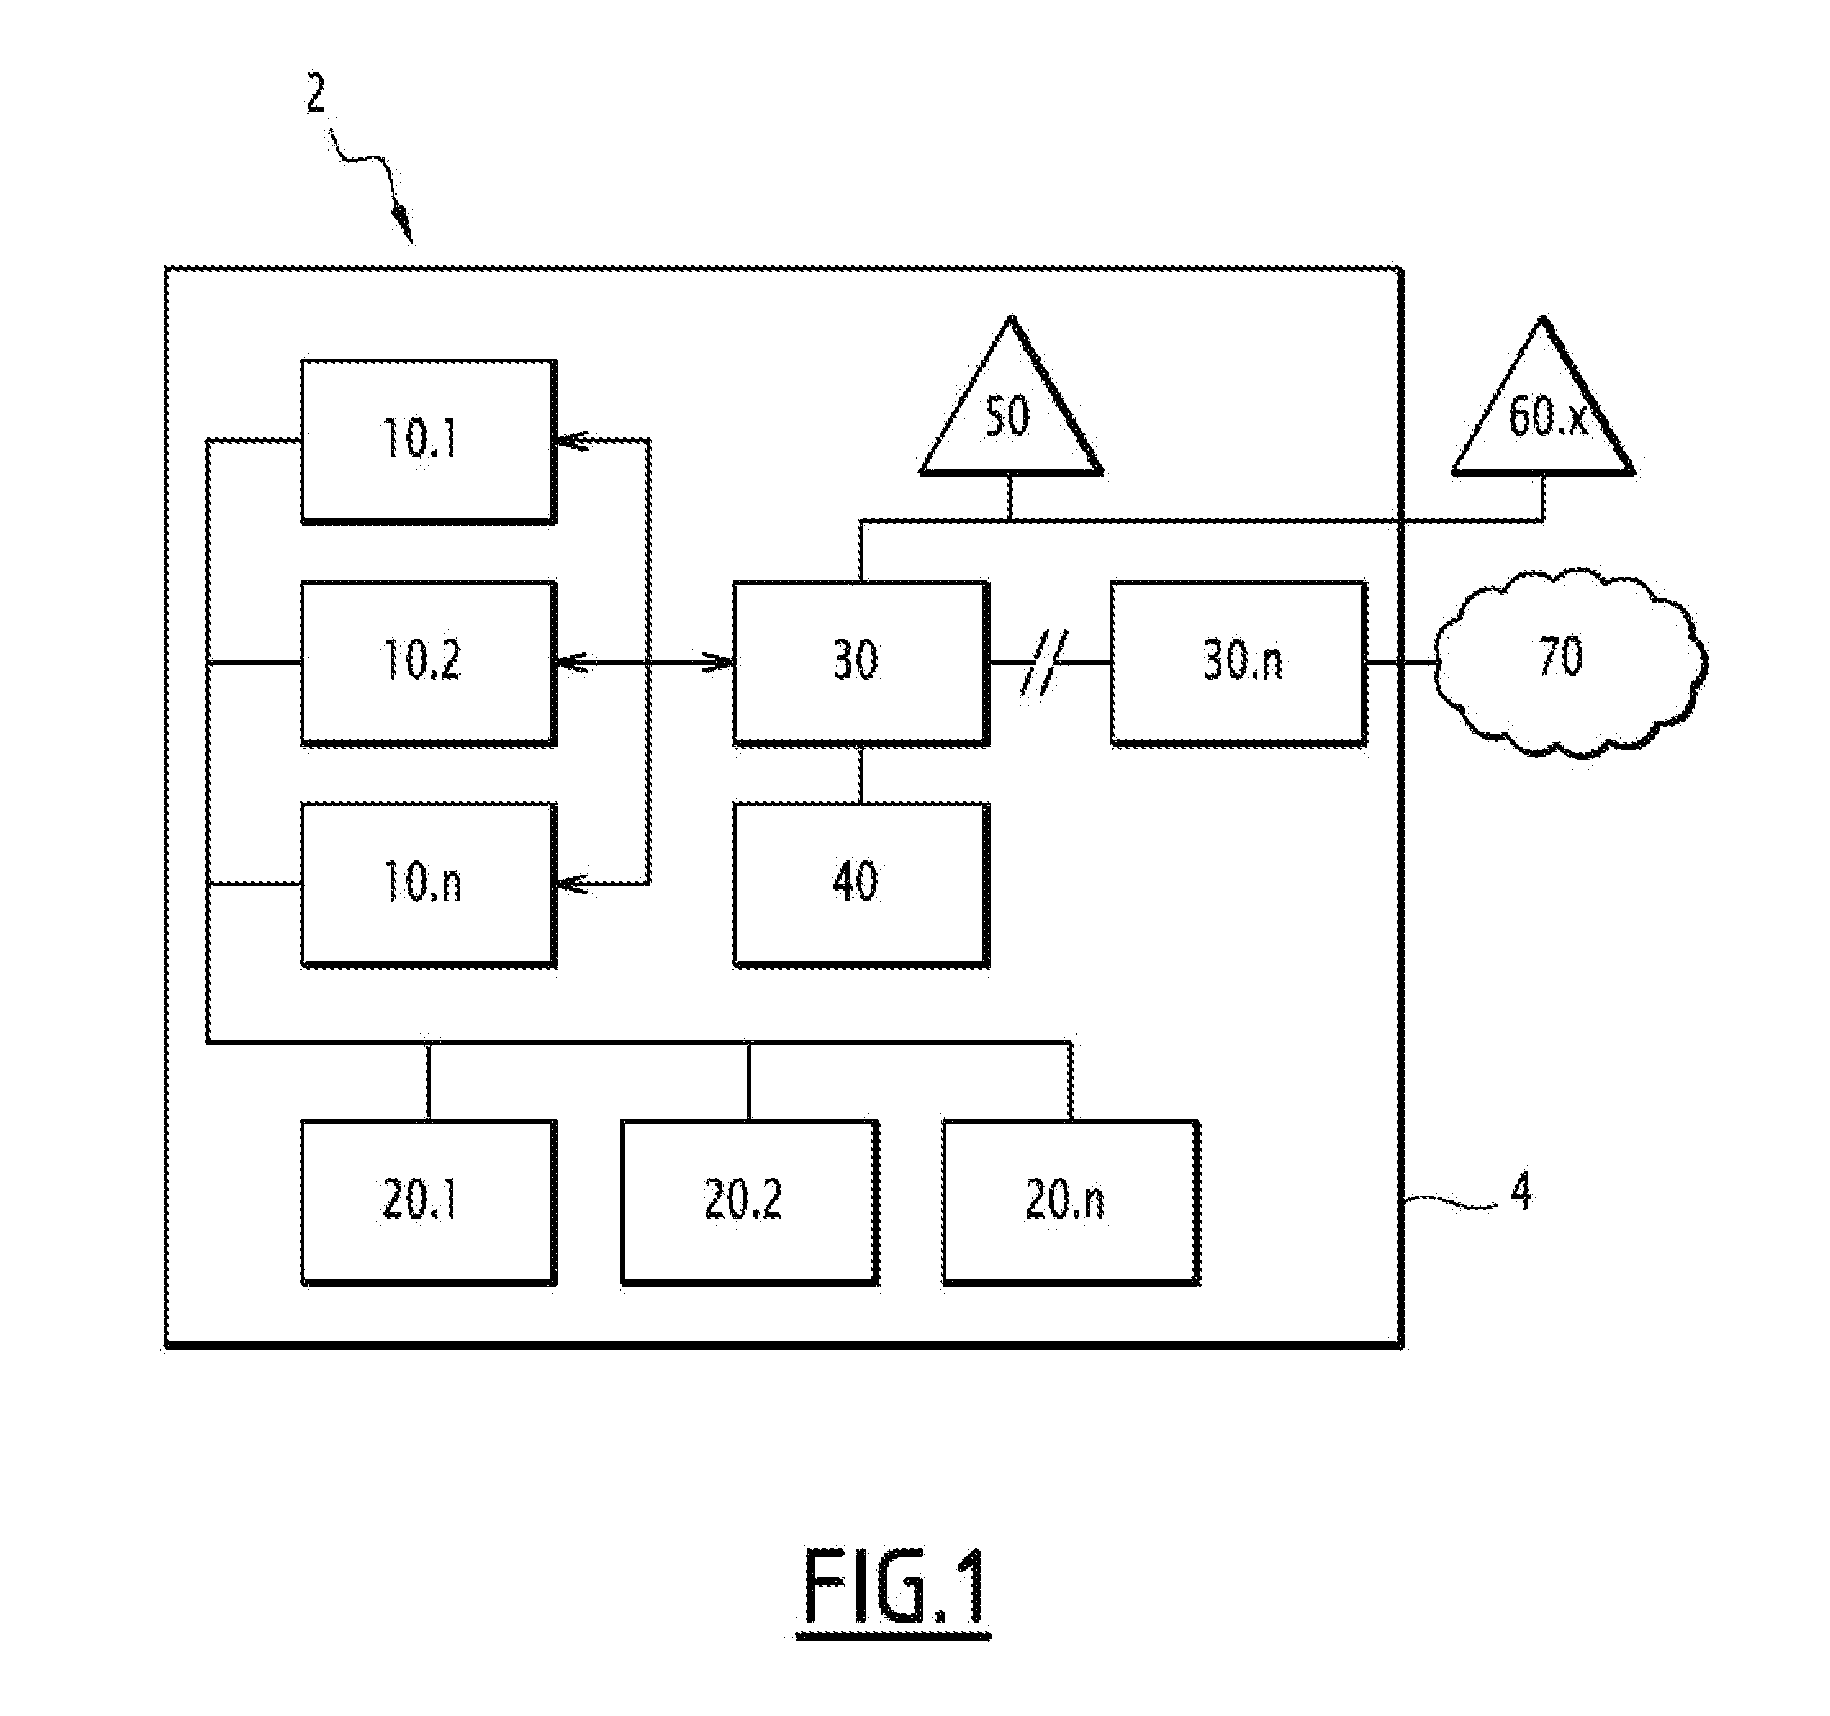 Method of exchanging data descriptive of technical installations